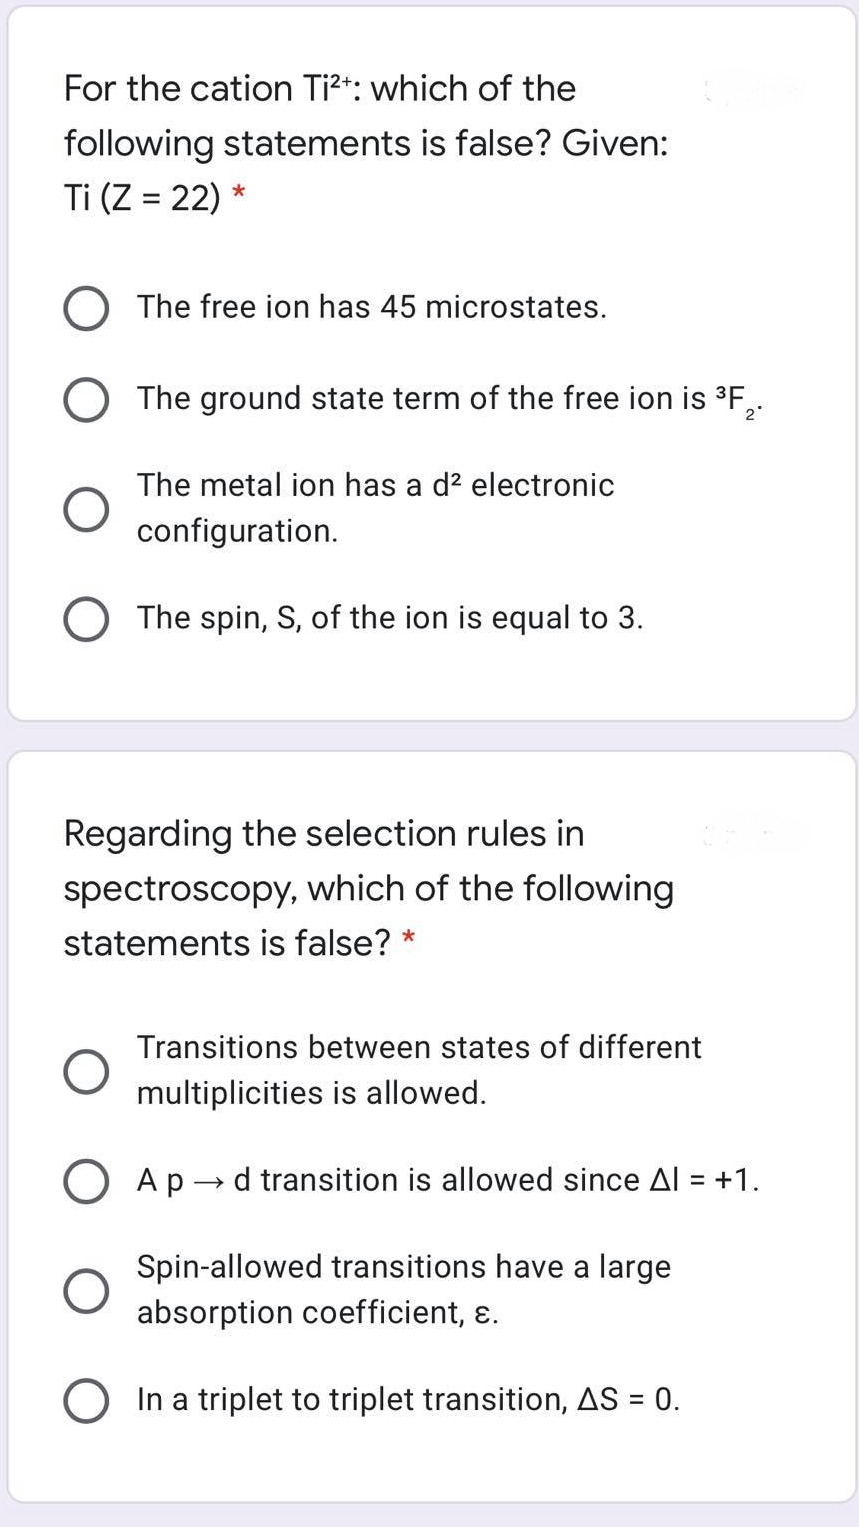 For the cation Ti?*: which of the
following statements is false? Given:
Ti (Z = 22) *
O The free ion has 45 microstates.
O The ground state term of the free ion is ³F,
2°
The metal ion has a d? electronic
configuration.
O The spin, S, of the ion is equal to 3.
Regarding the selection rules in
spectroscopy, which of the following
statements is false? *
Transitions between states of different
multiplicities is allowed.
O Ap - d transition is allowed since Al = +1.
%3D
Spin-allowed transitions have a large
absorption coefficient, ɛ.
O In a triplet to triplet transition, AS = 0.
